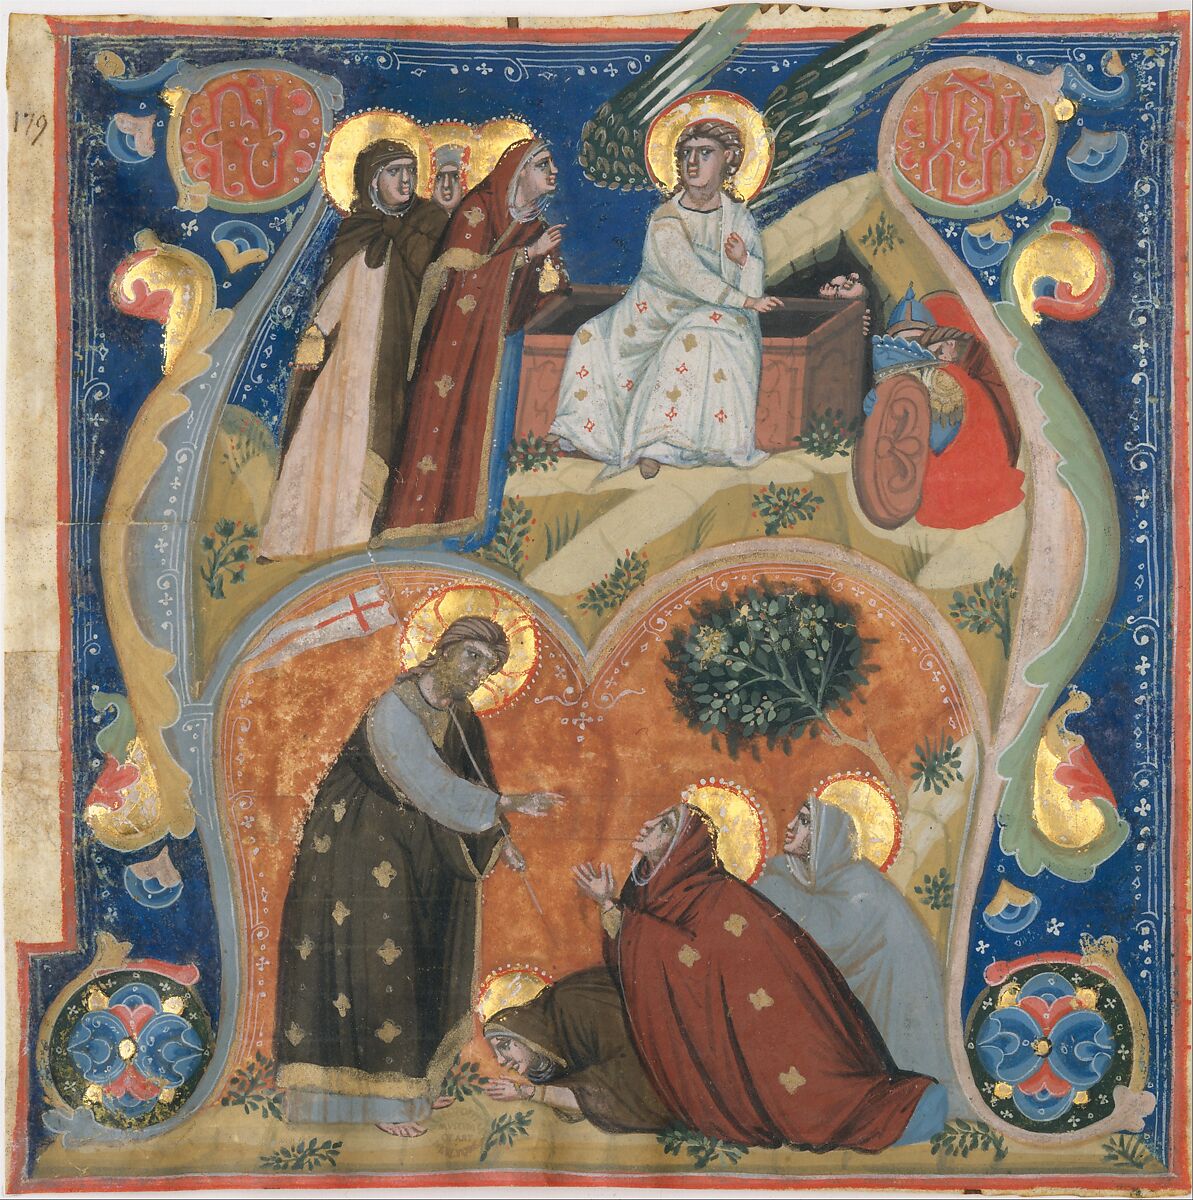 Manuscript Illumination with Scenes of Easter in an Initial A, from an Antiphonary